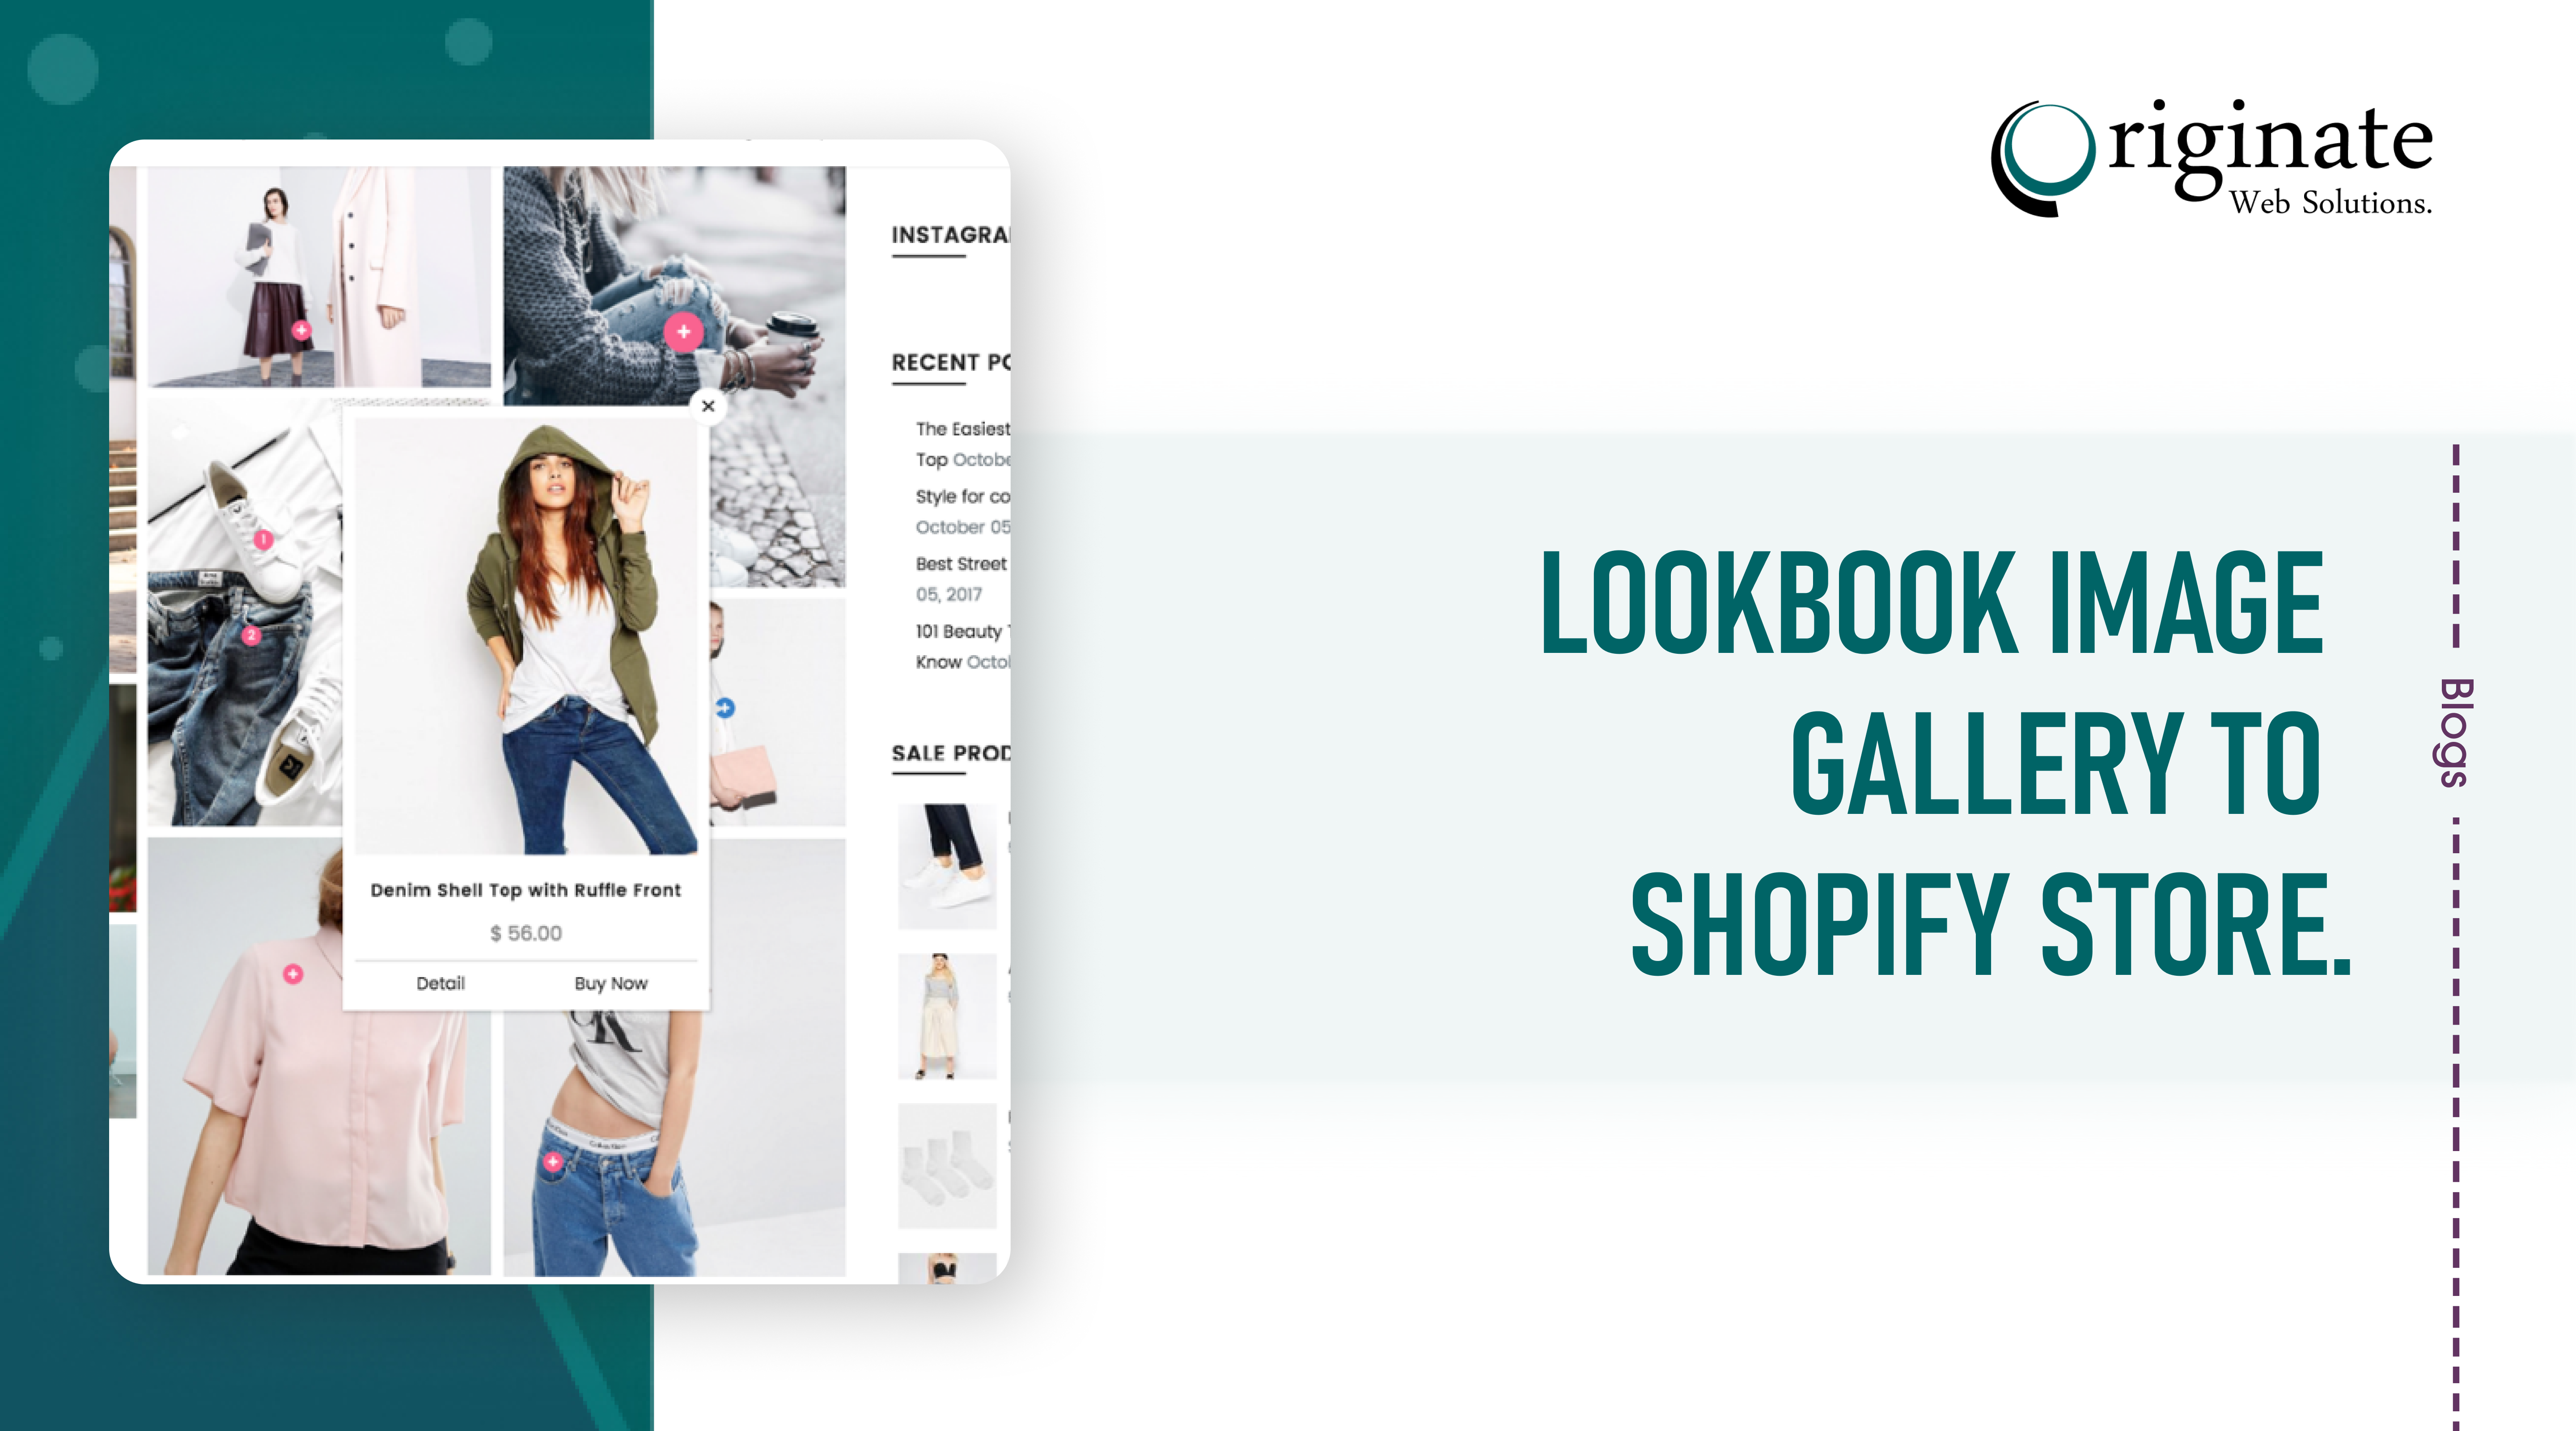 LookBook Image Gallery to Shopify store